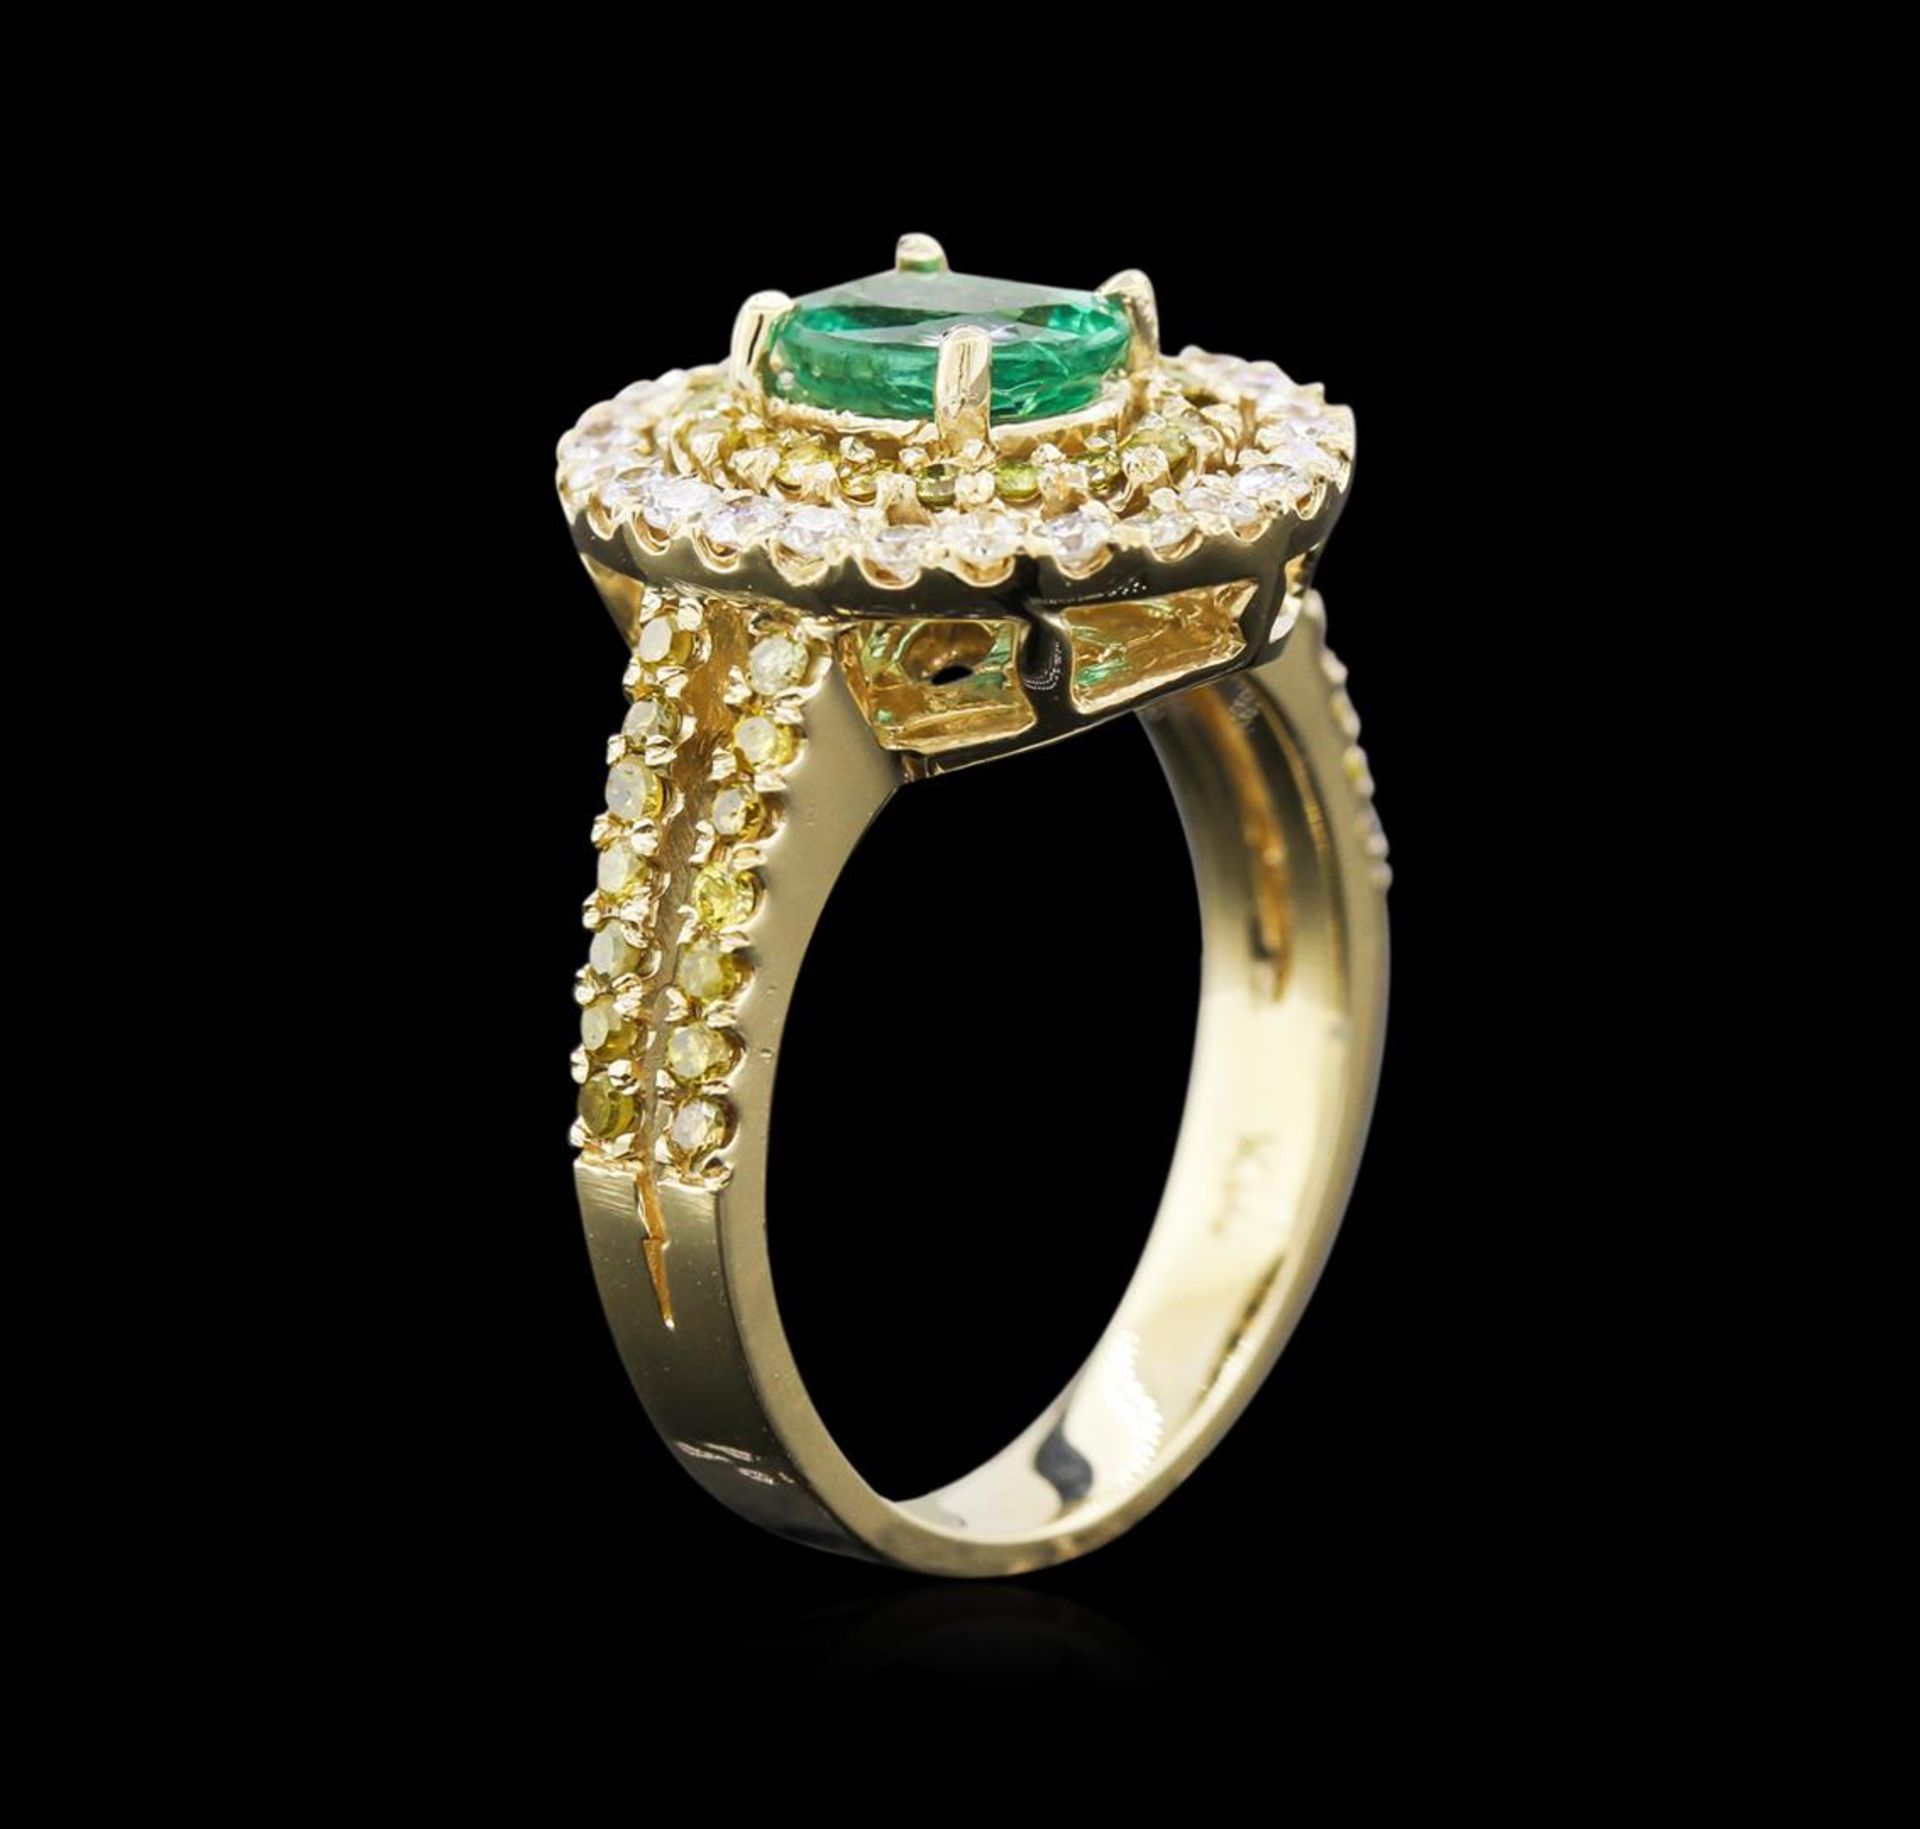 0.88 ctw Emerald and Diamond Ring - 14KT Yellow Gold - Image 3 of 3